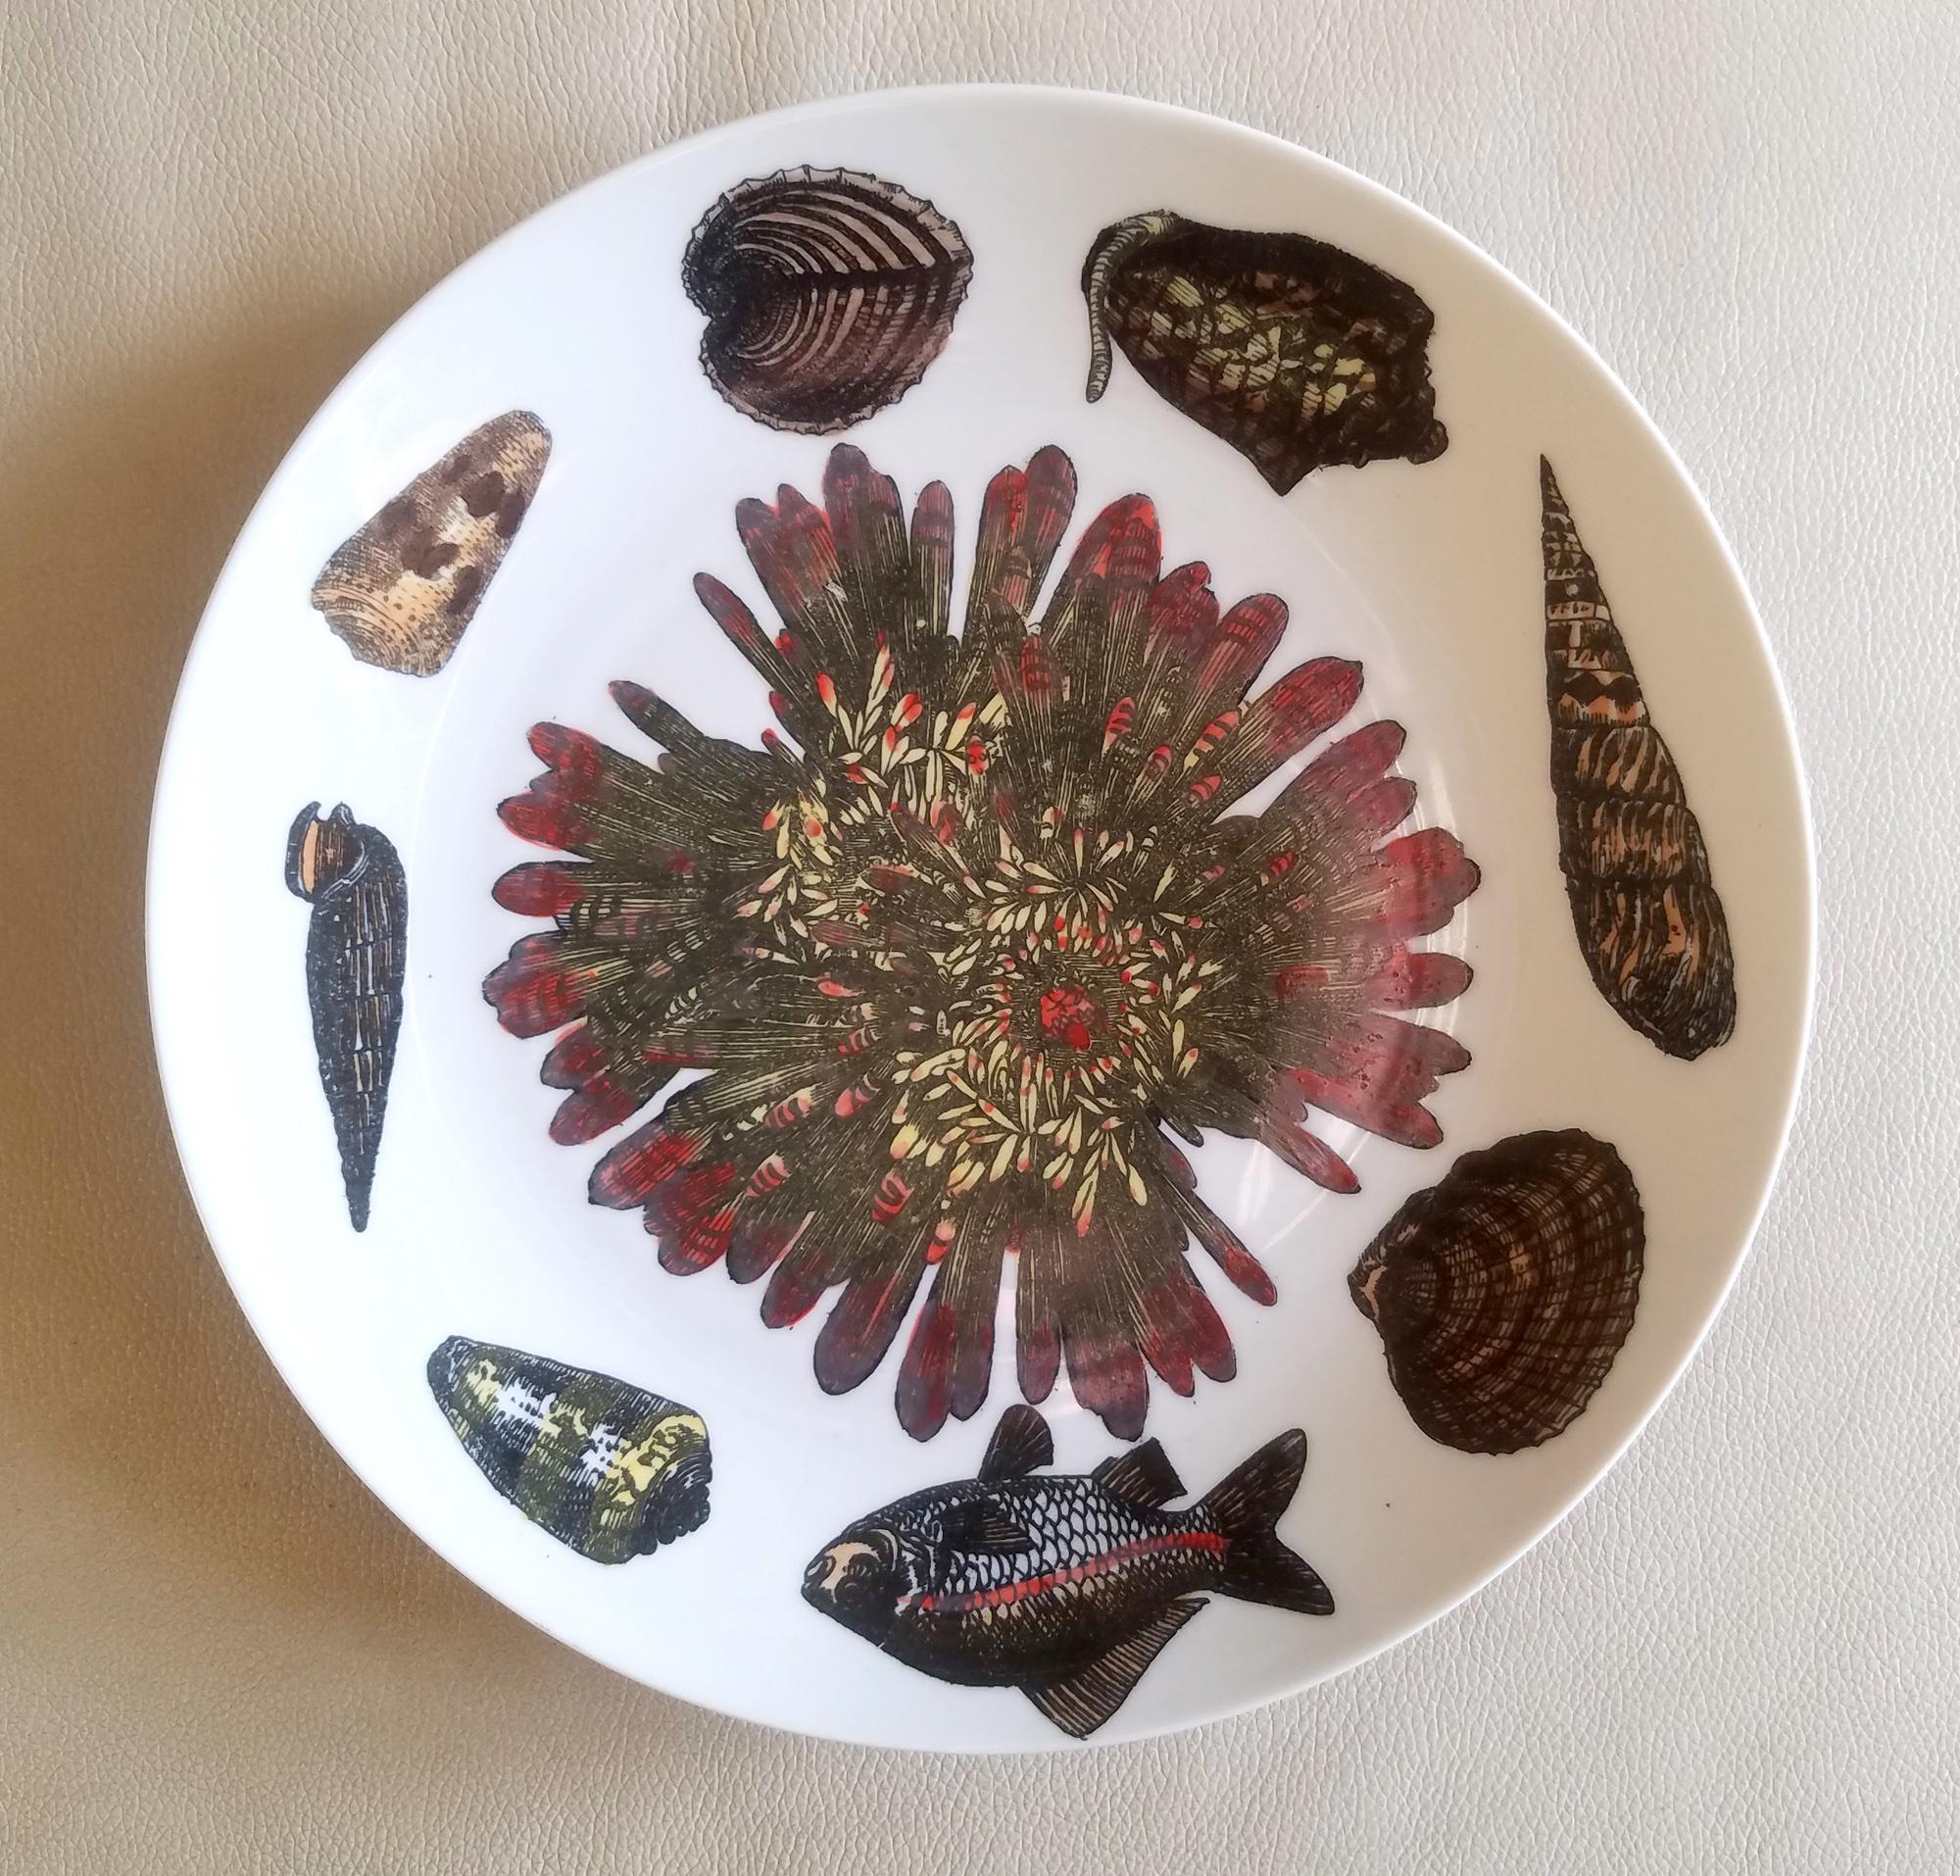 Piero Fornasetti Porcelain Conchiglie Seashell Set of Plates with Mollusks For Sale 7